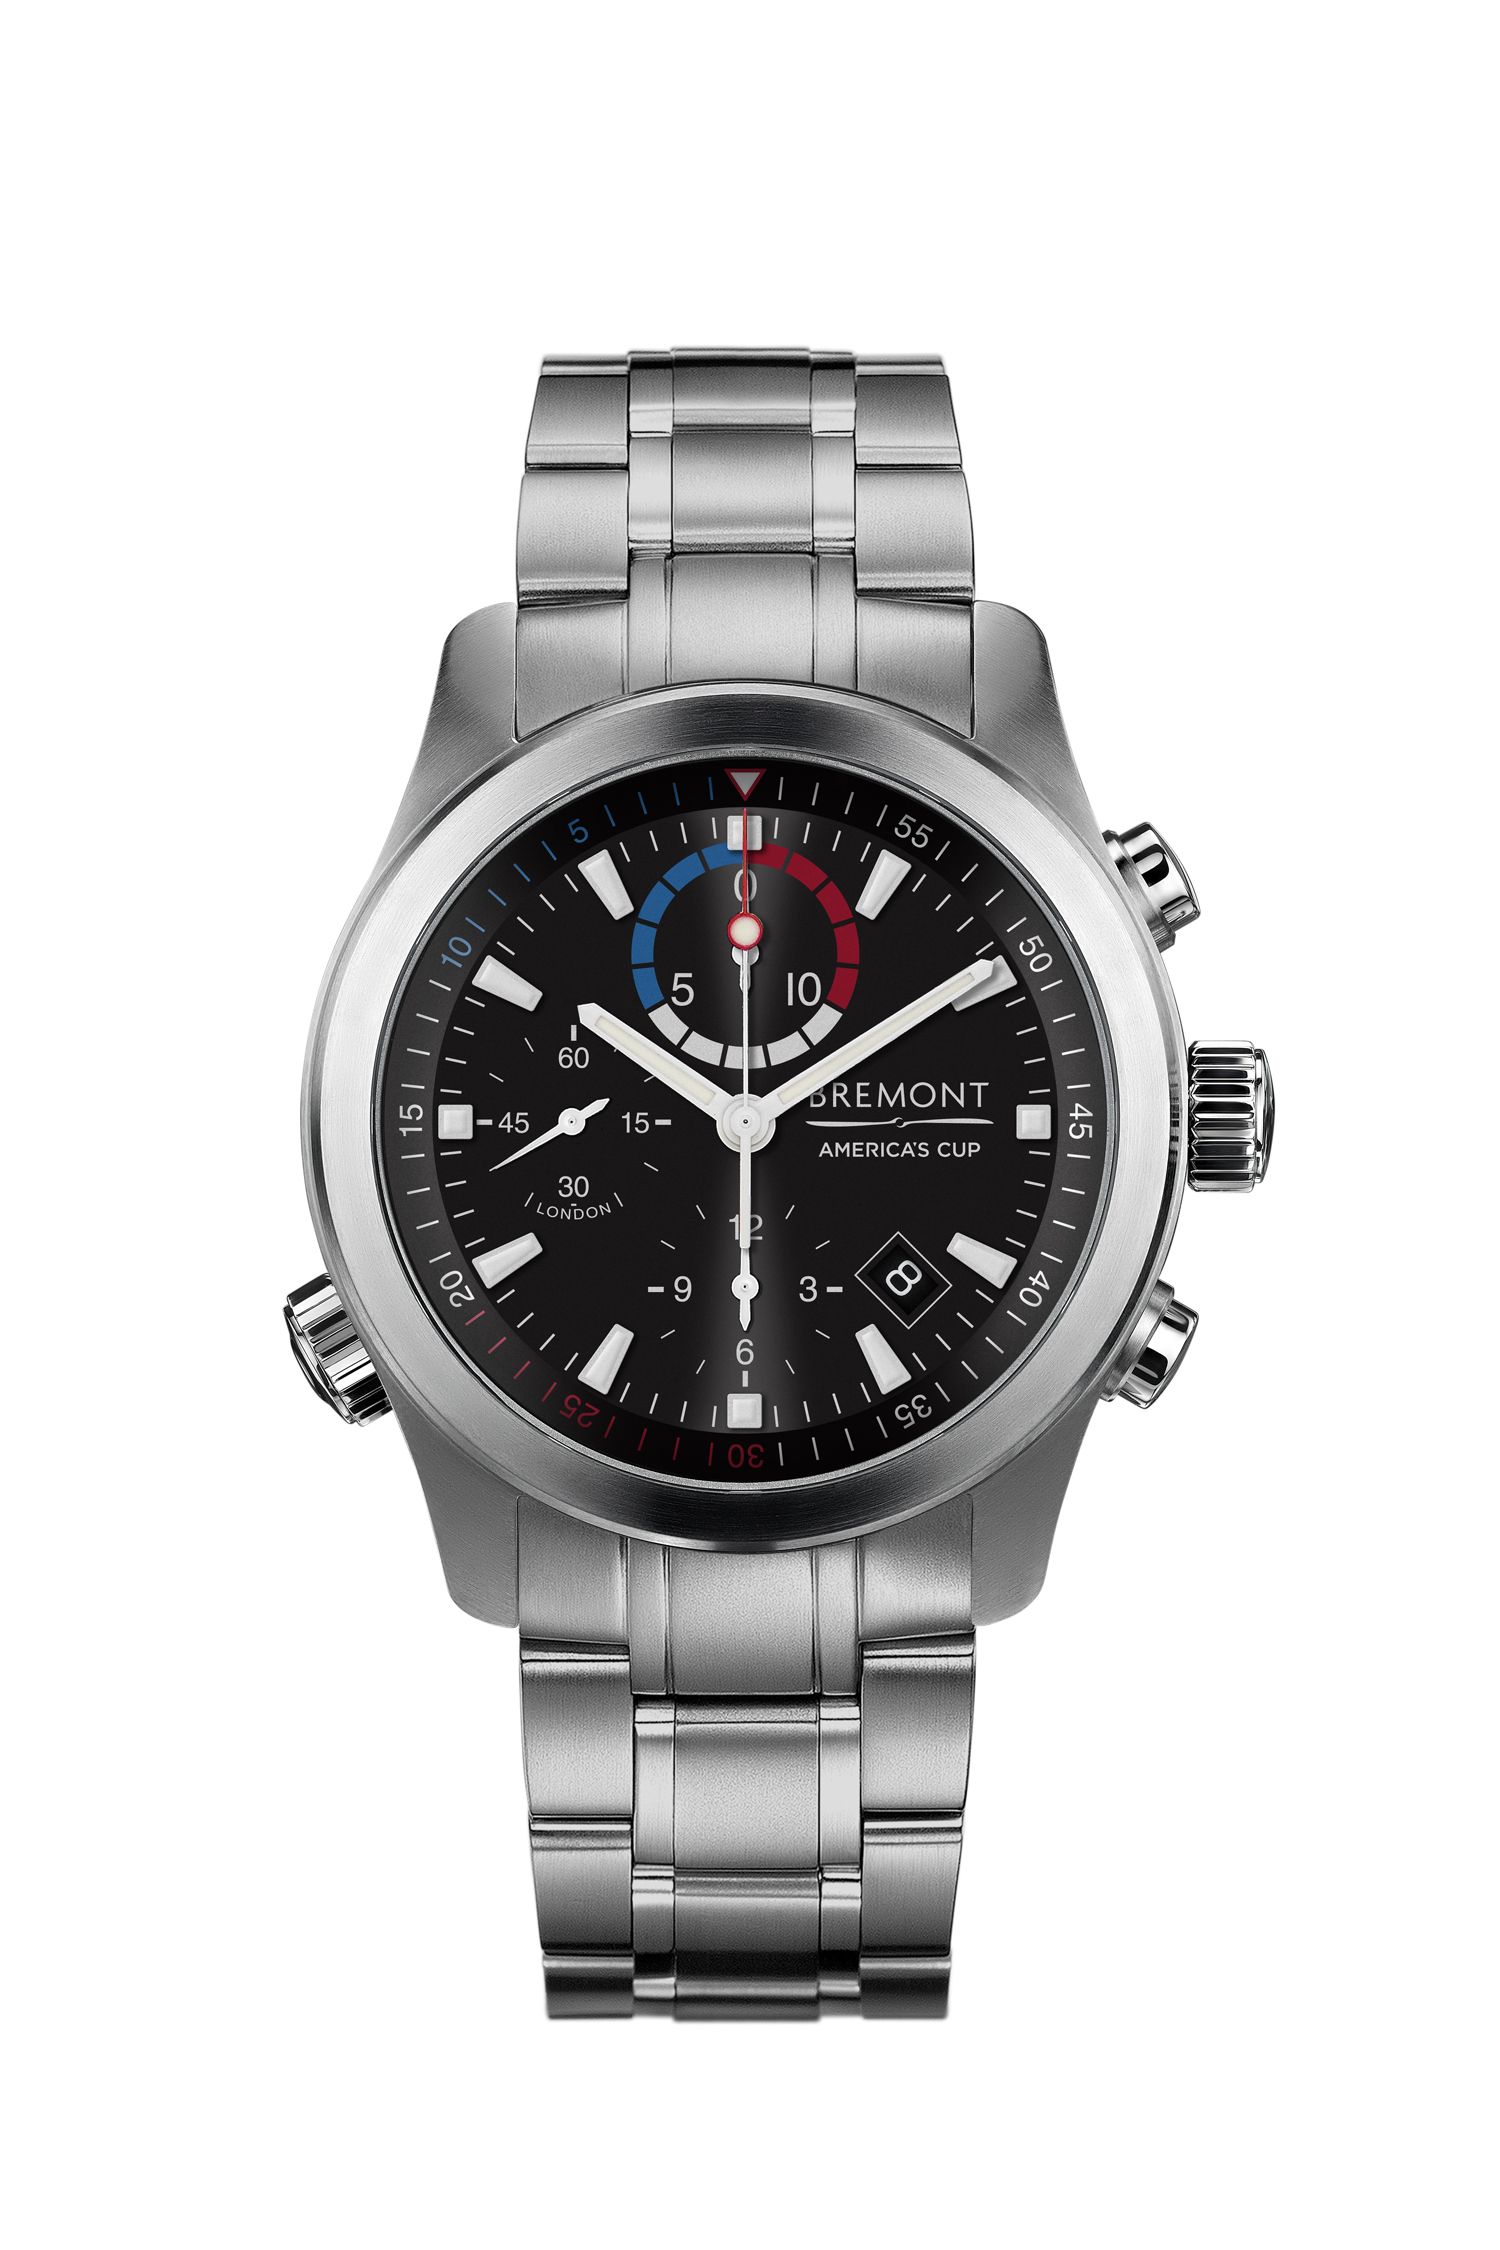 Louis Vuitton Tambour America's Cup Chronograph World 1851 Limited